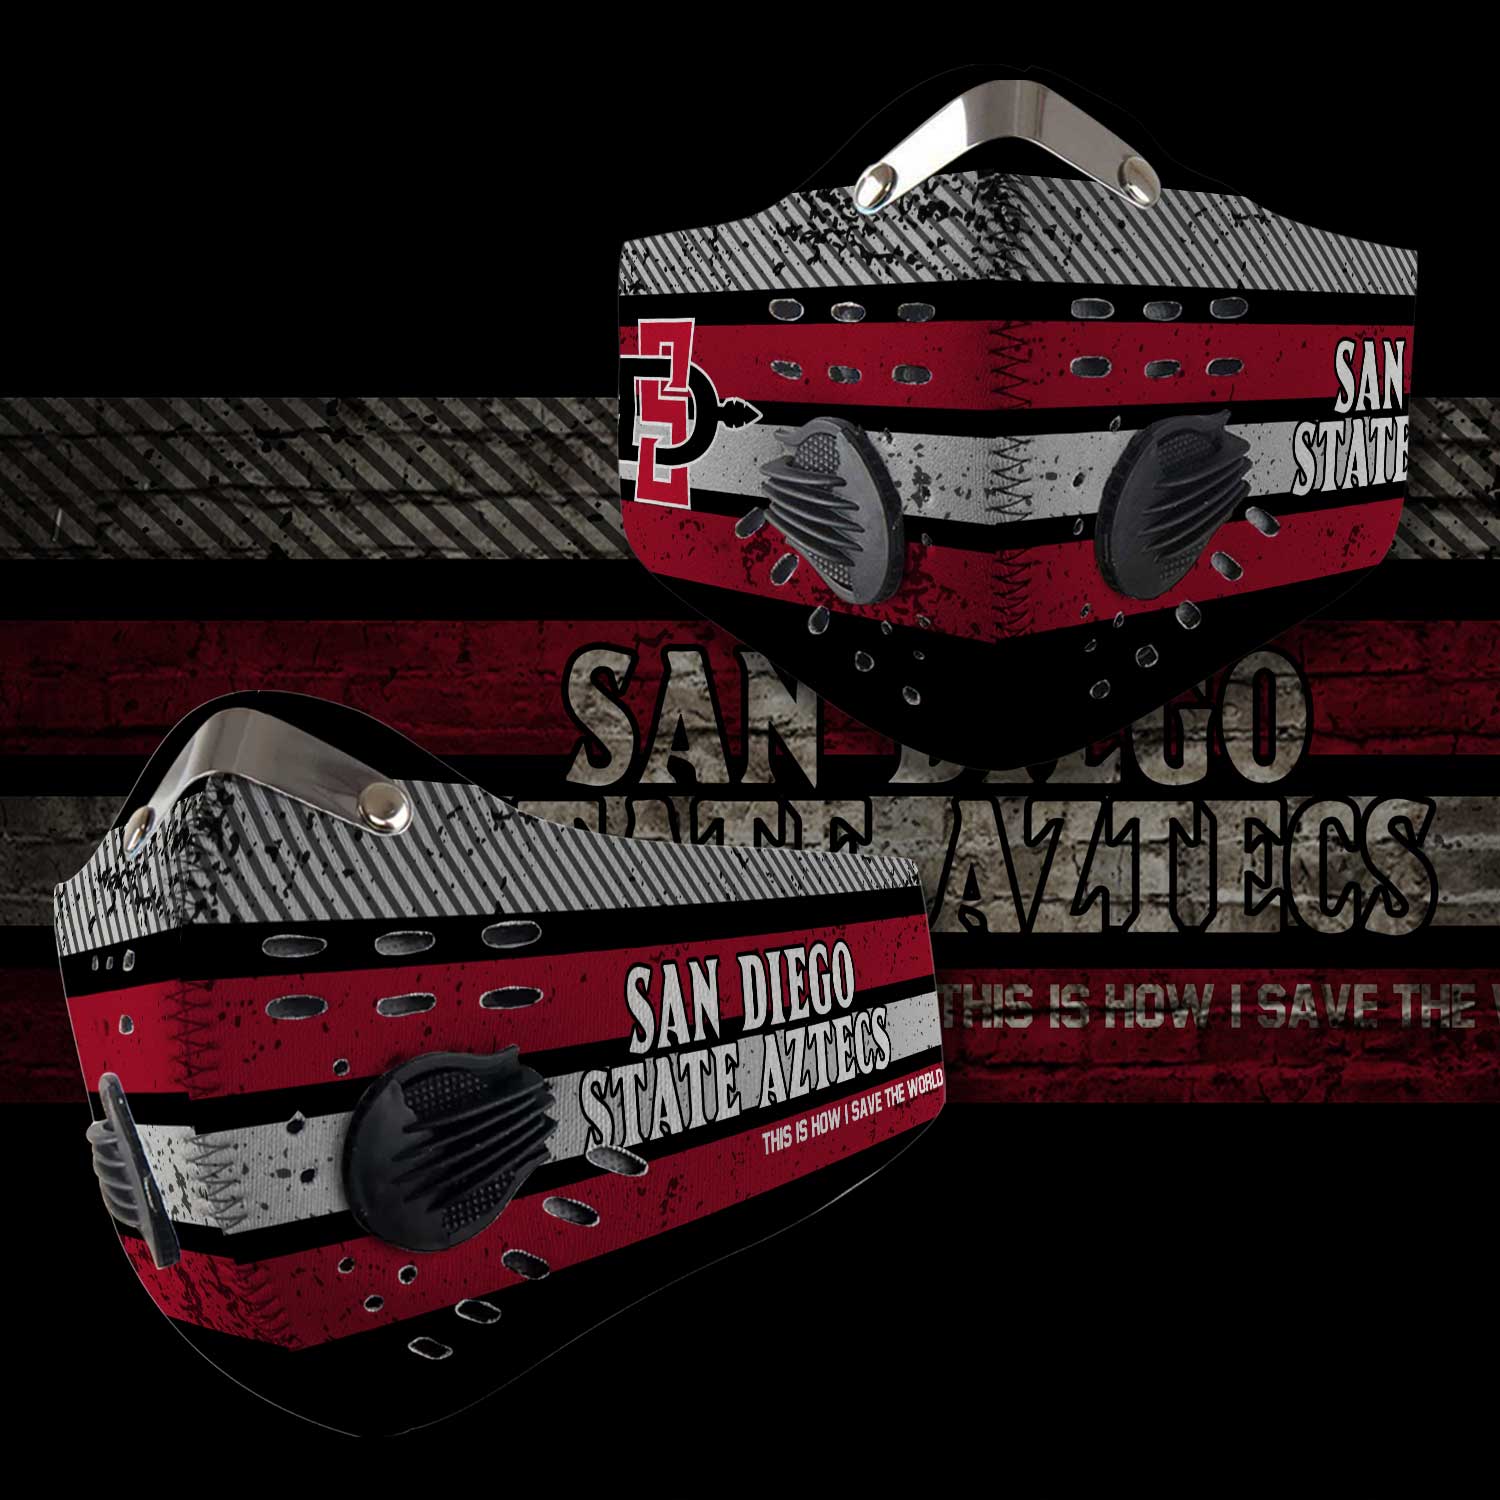 San diego state aztecs this is how i save the world face mask – maria